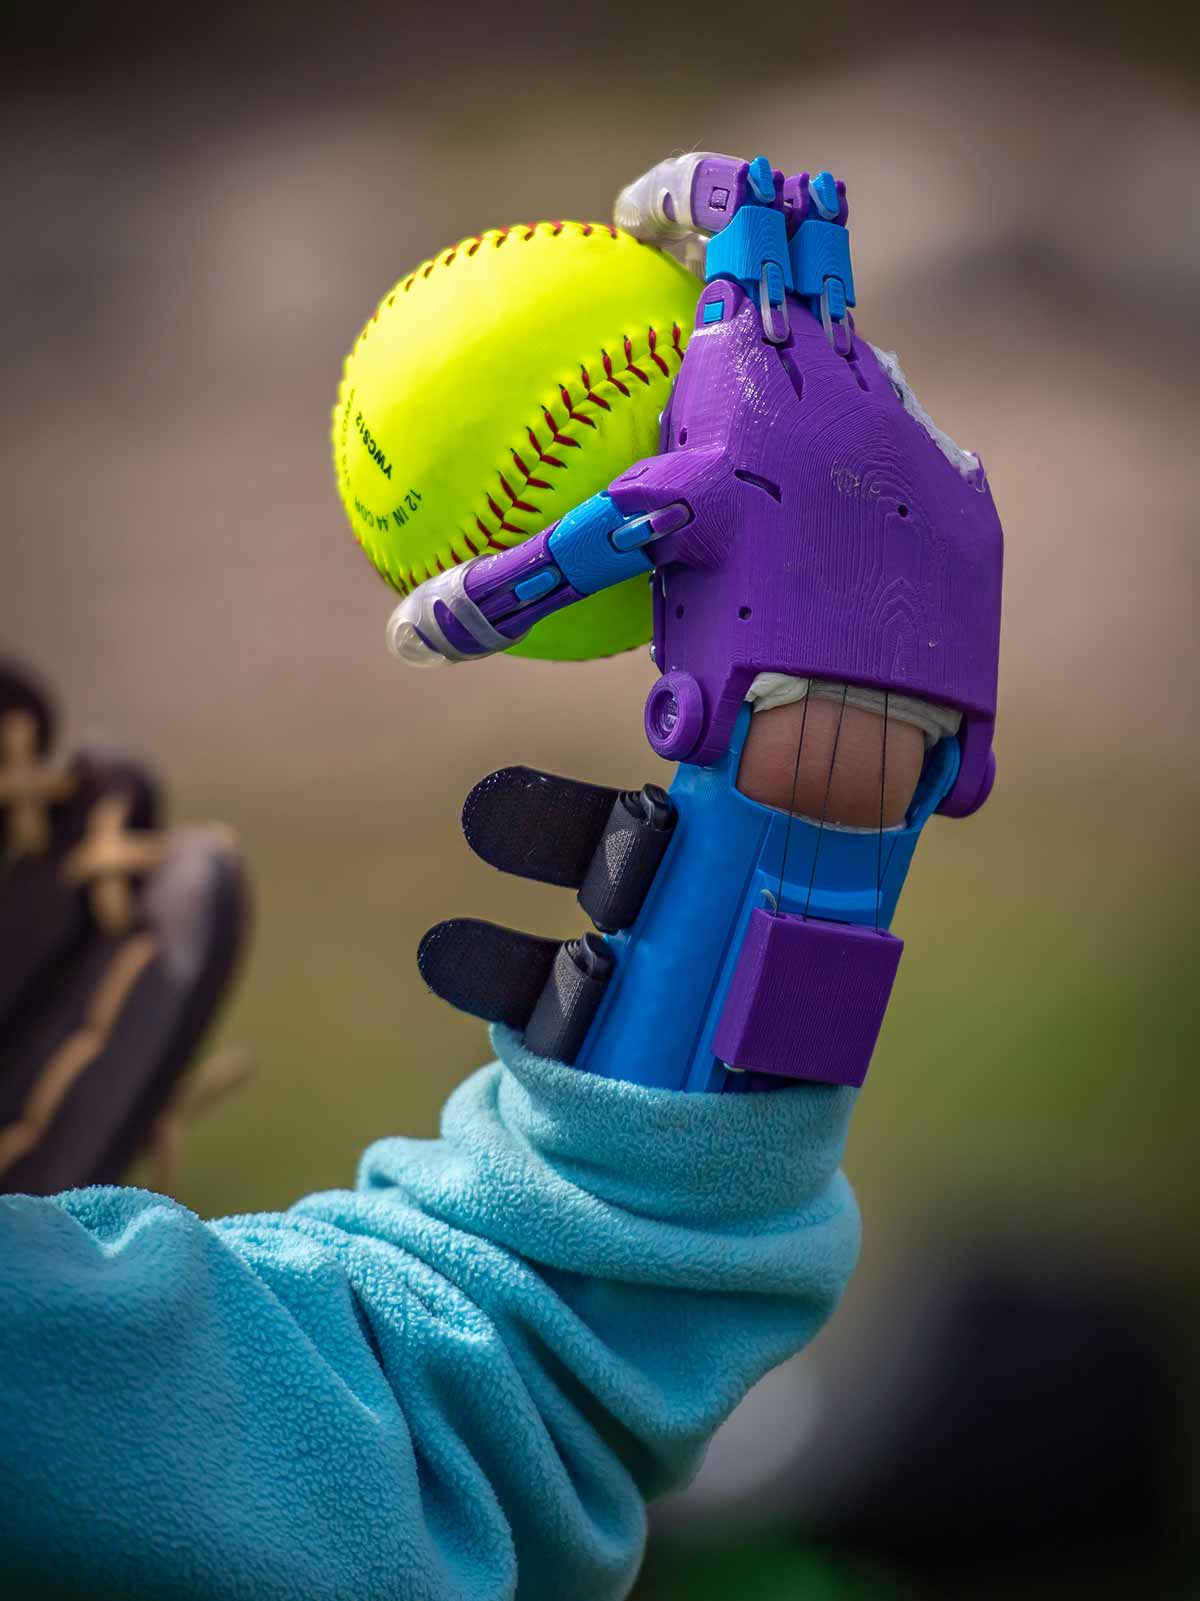 Tori throwing a softball with her new prosthetic hands.